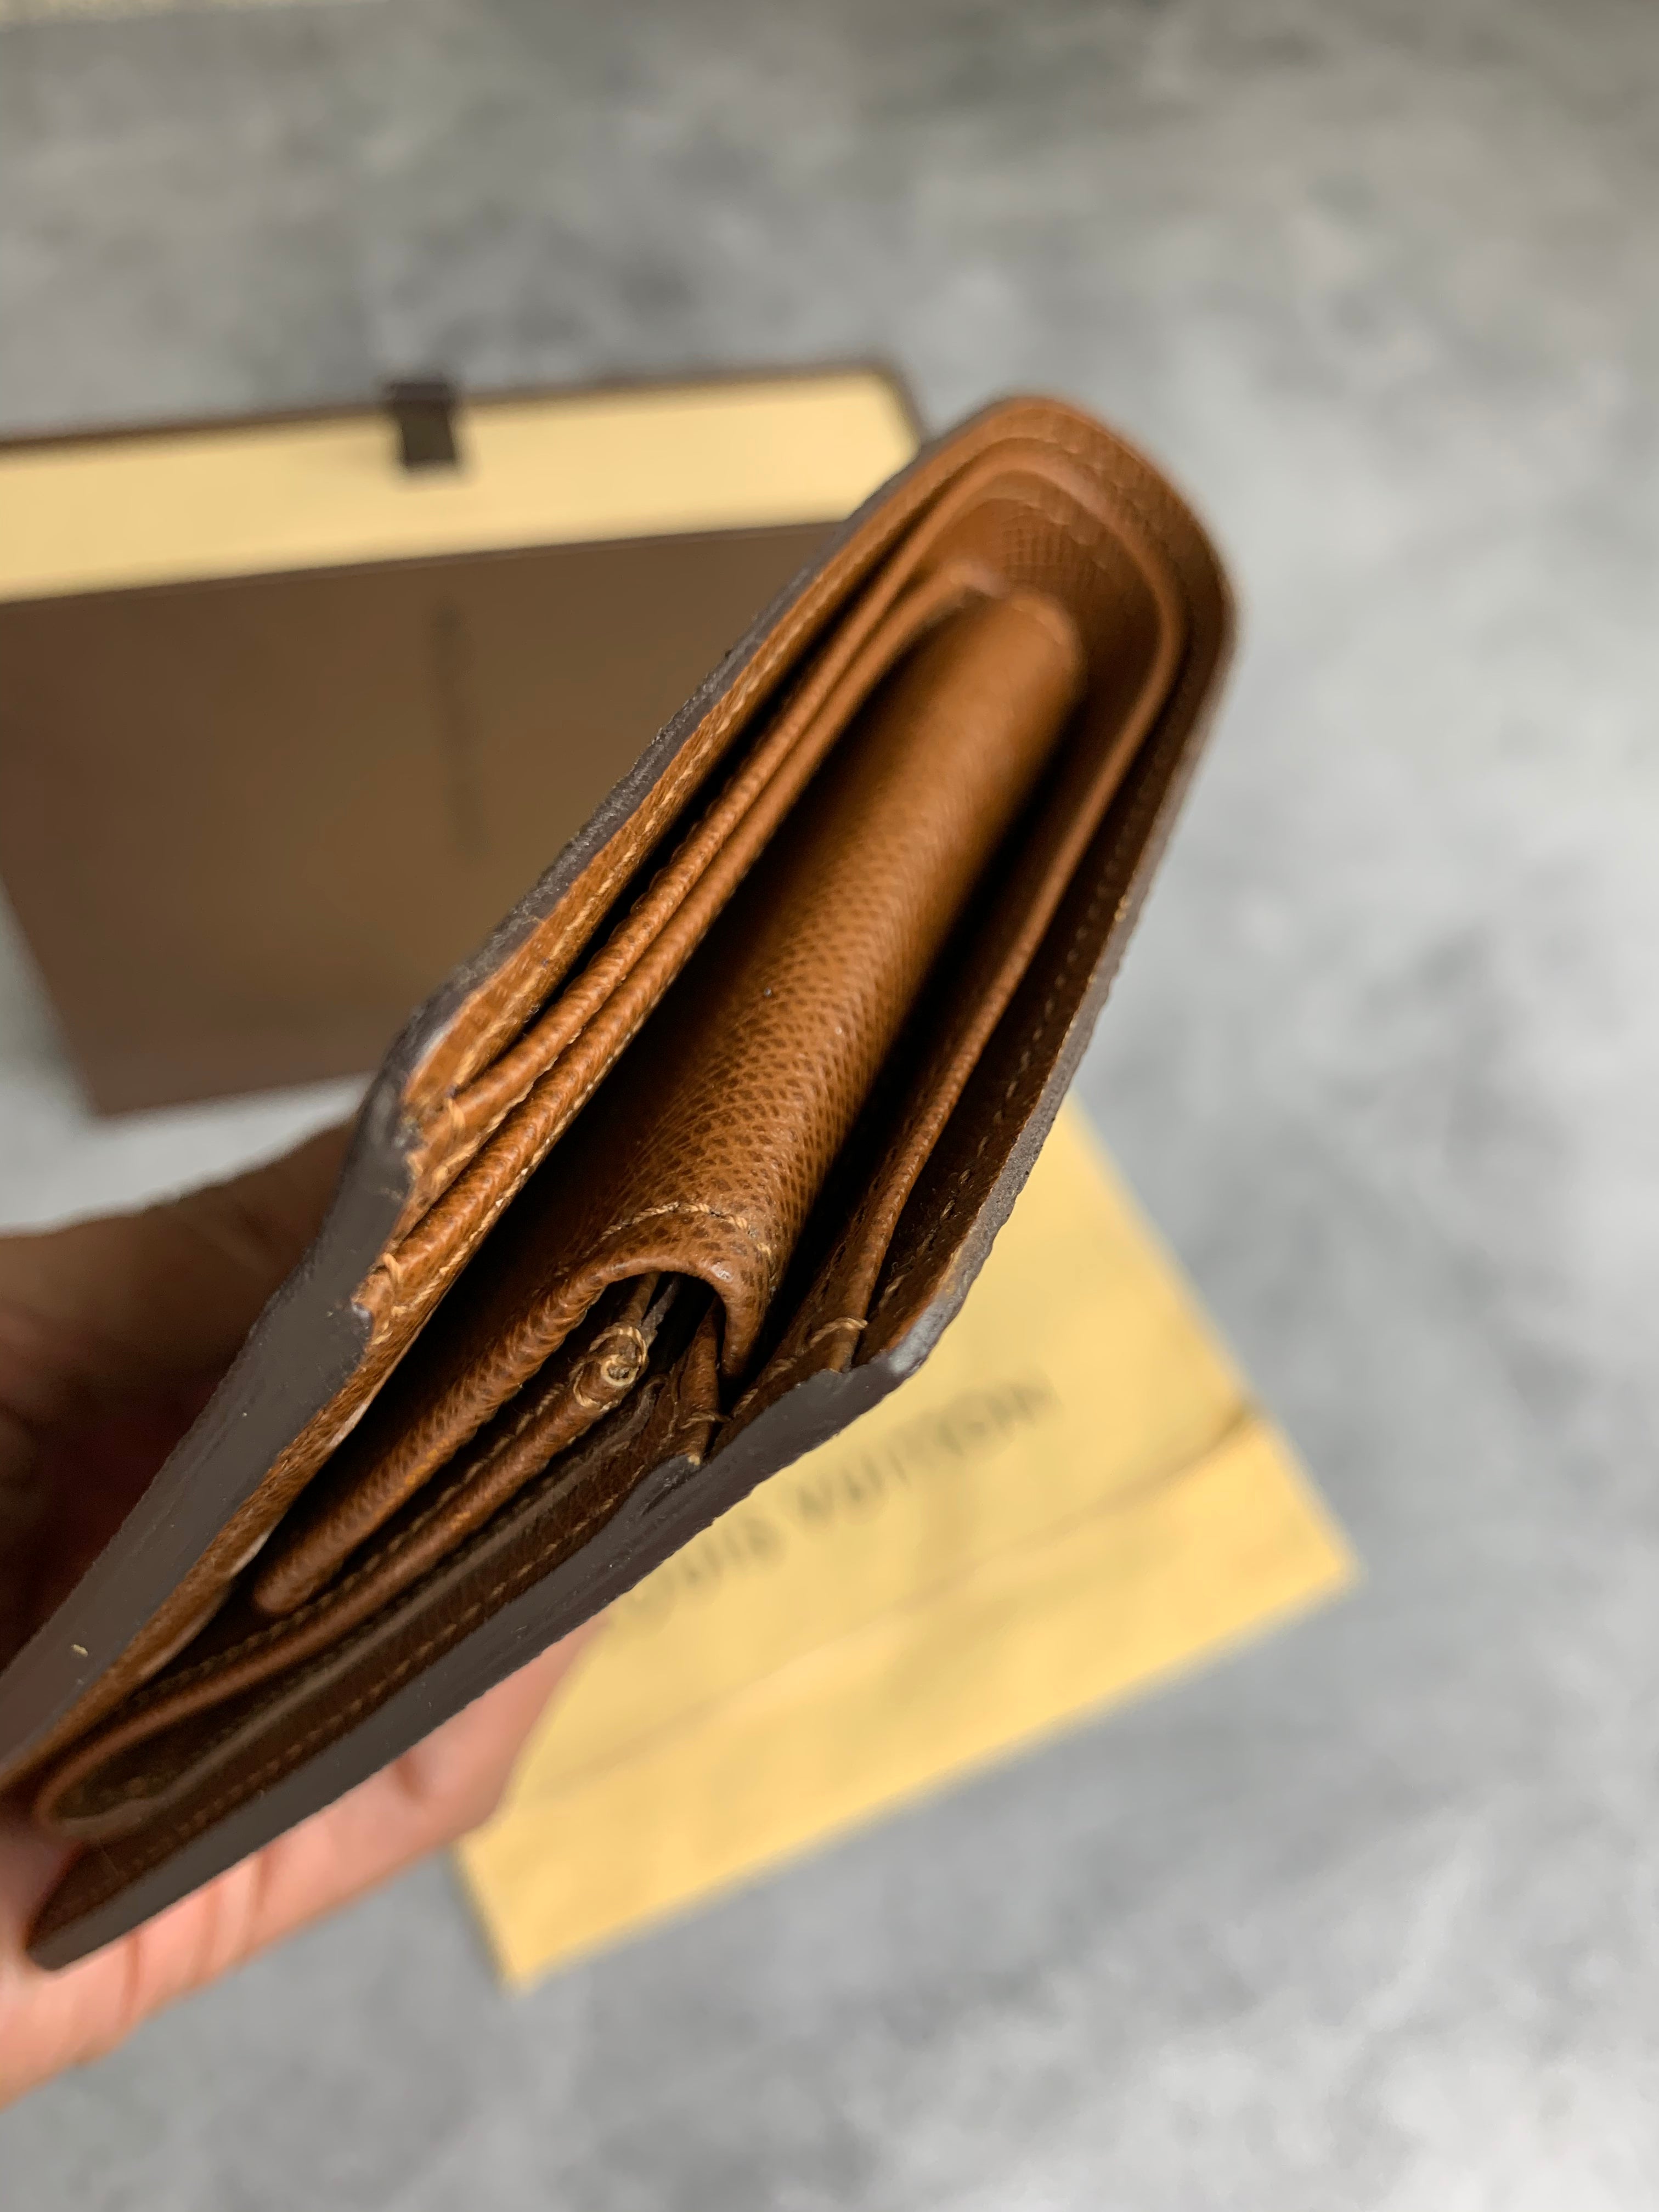 How to Tell if a Louis Vuitton Men's Wallet Is Real